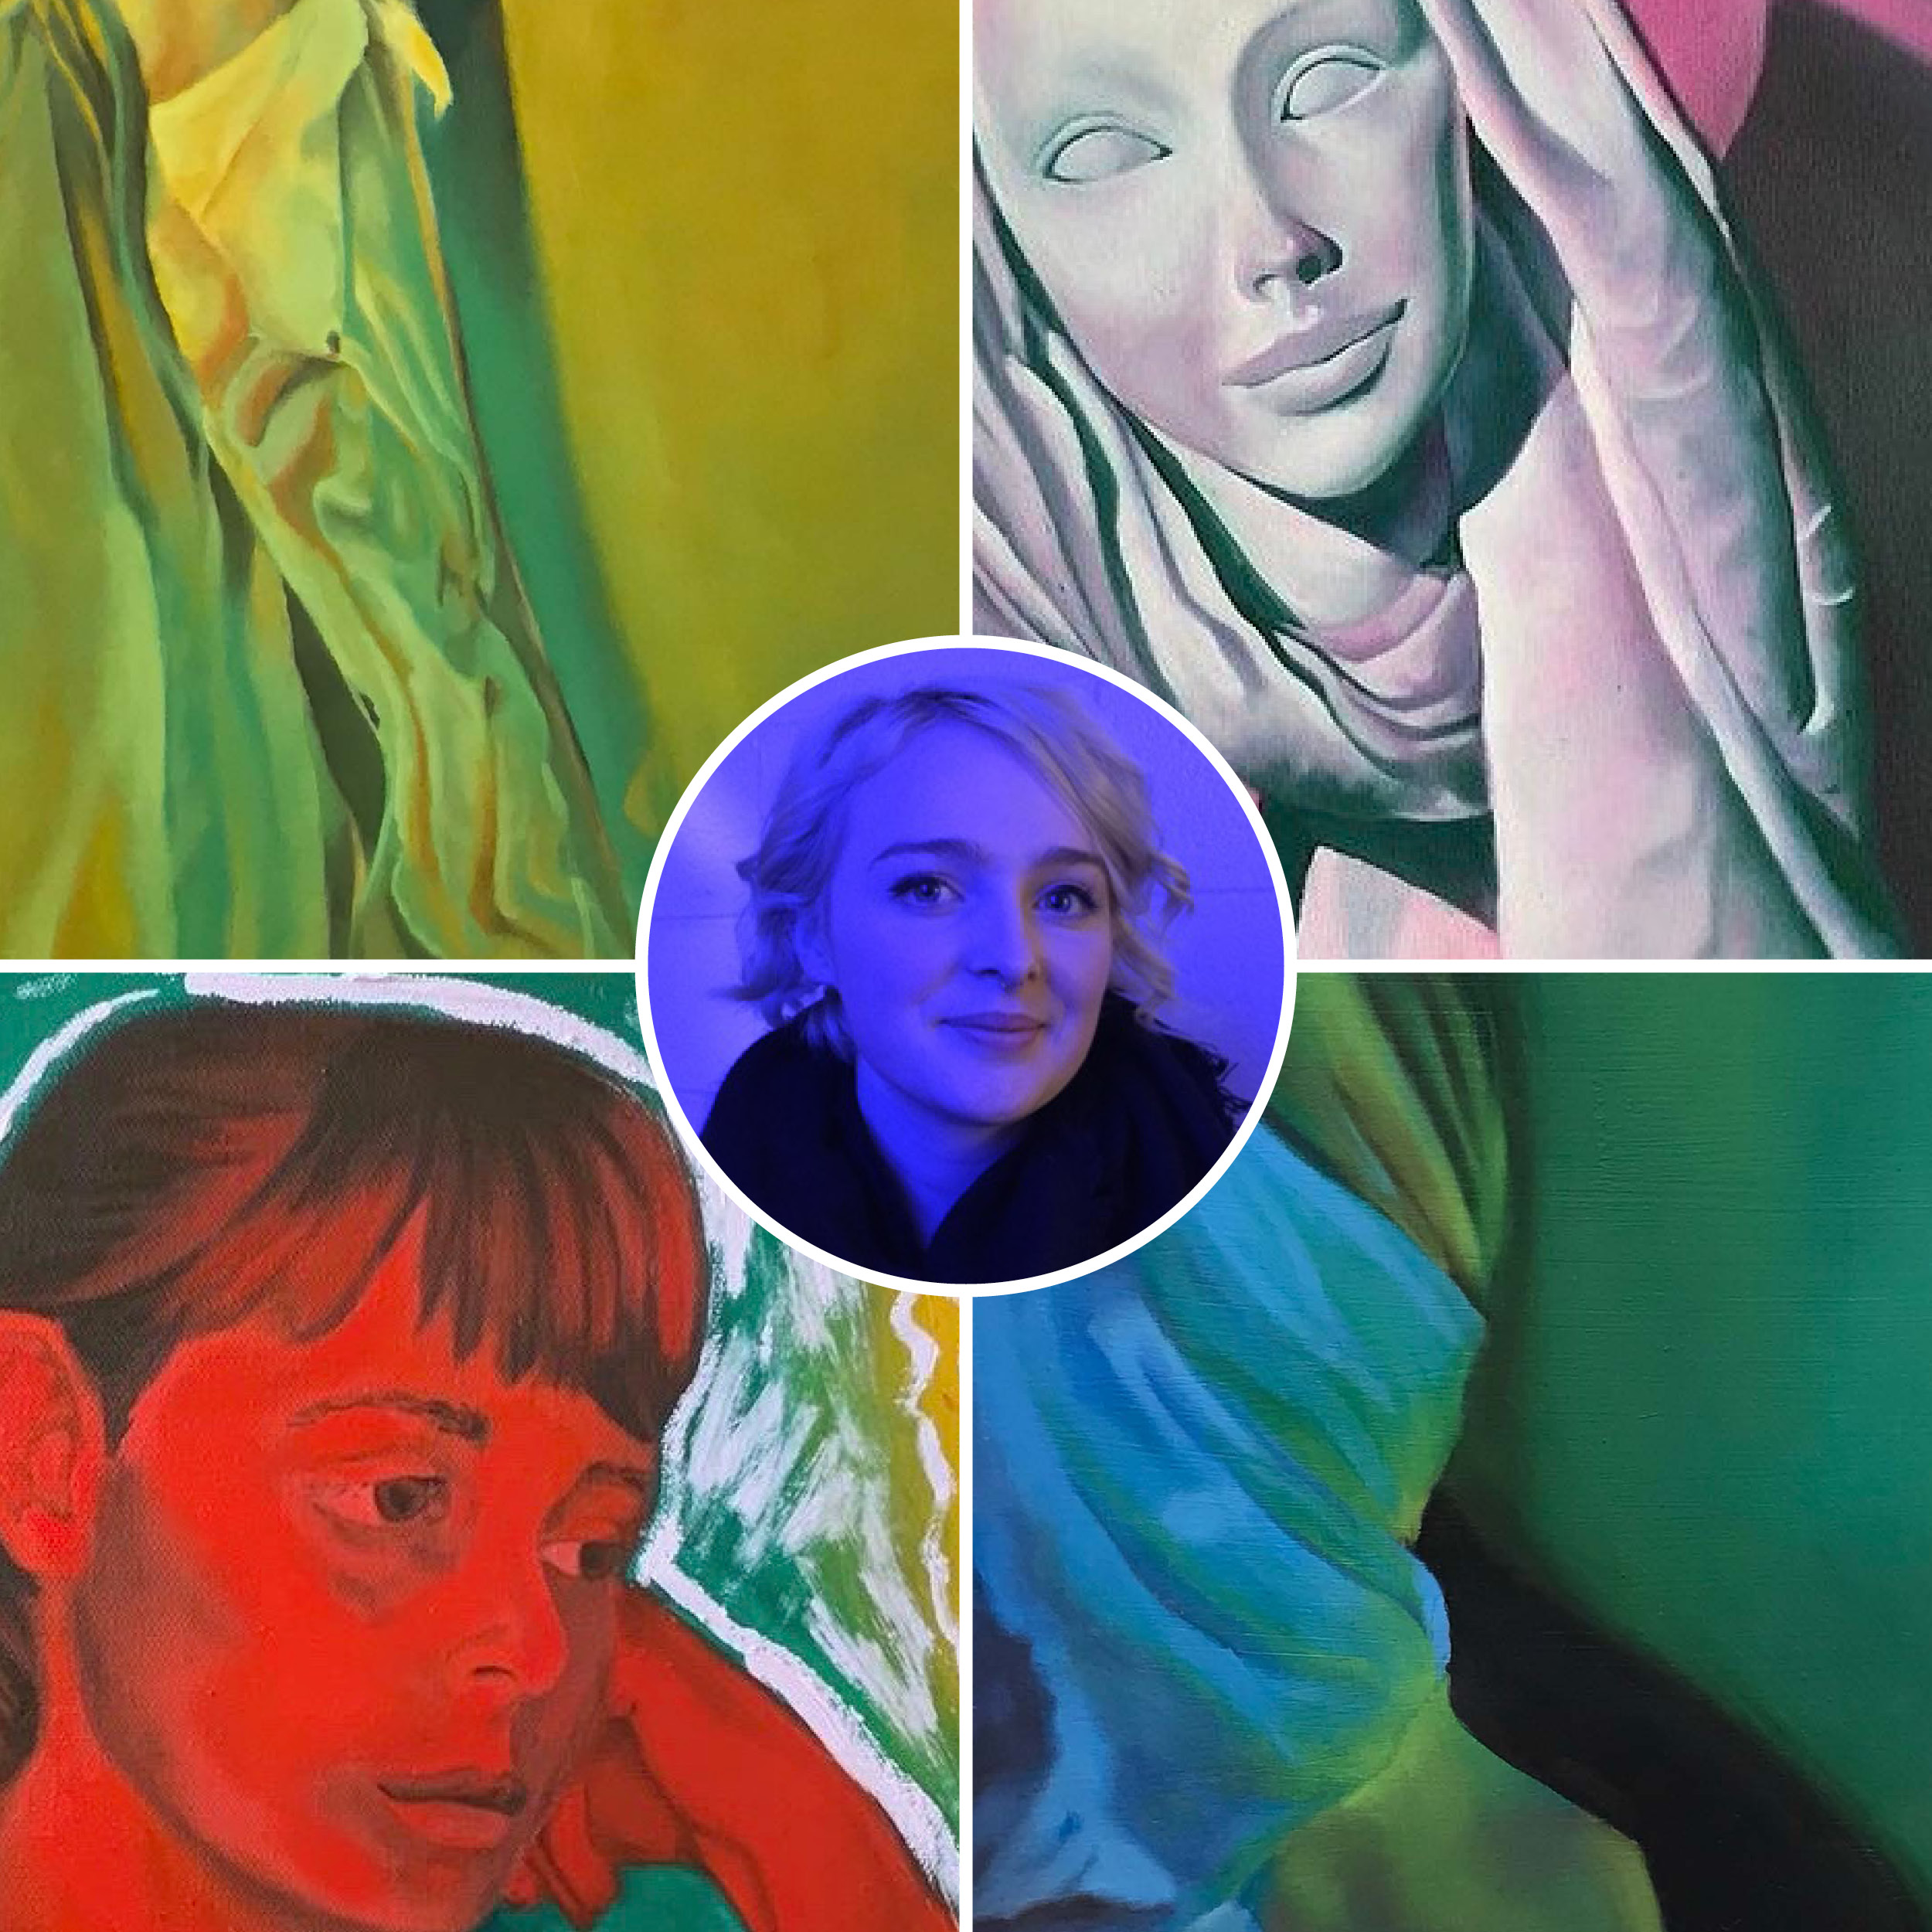 Image of woman with blond hair; work samples of oil paintings